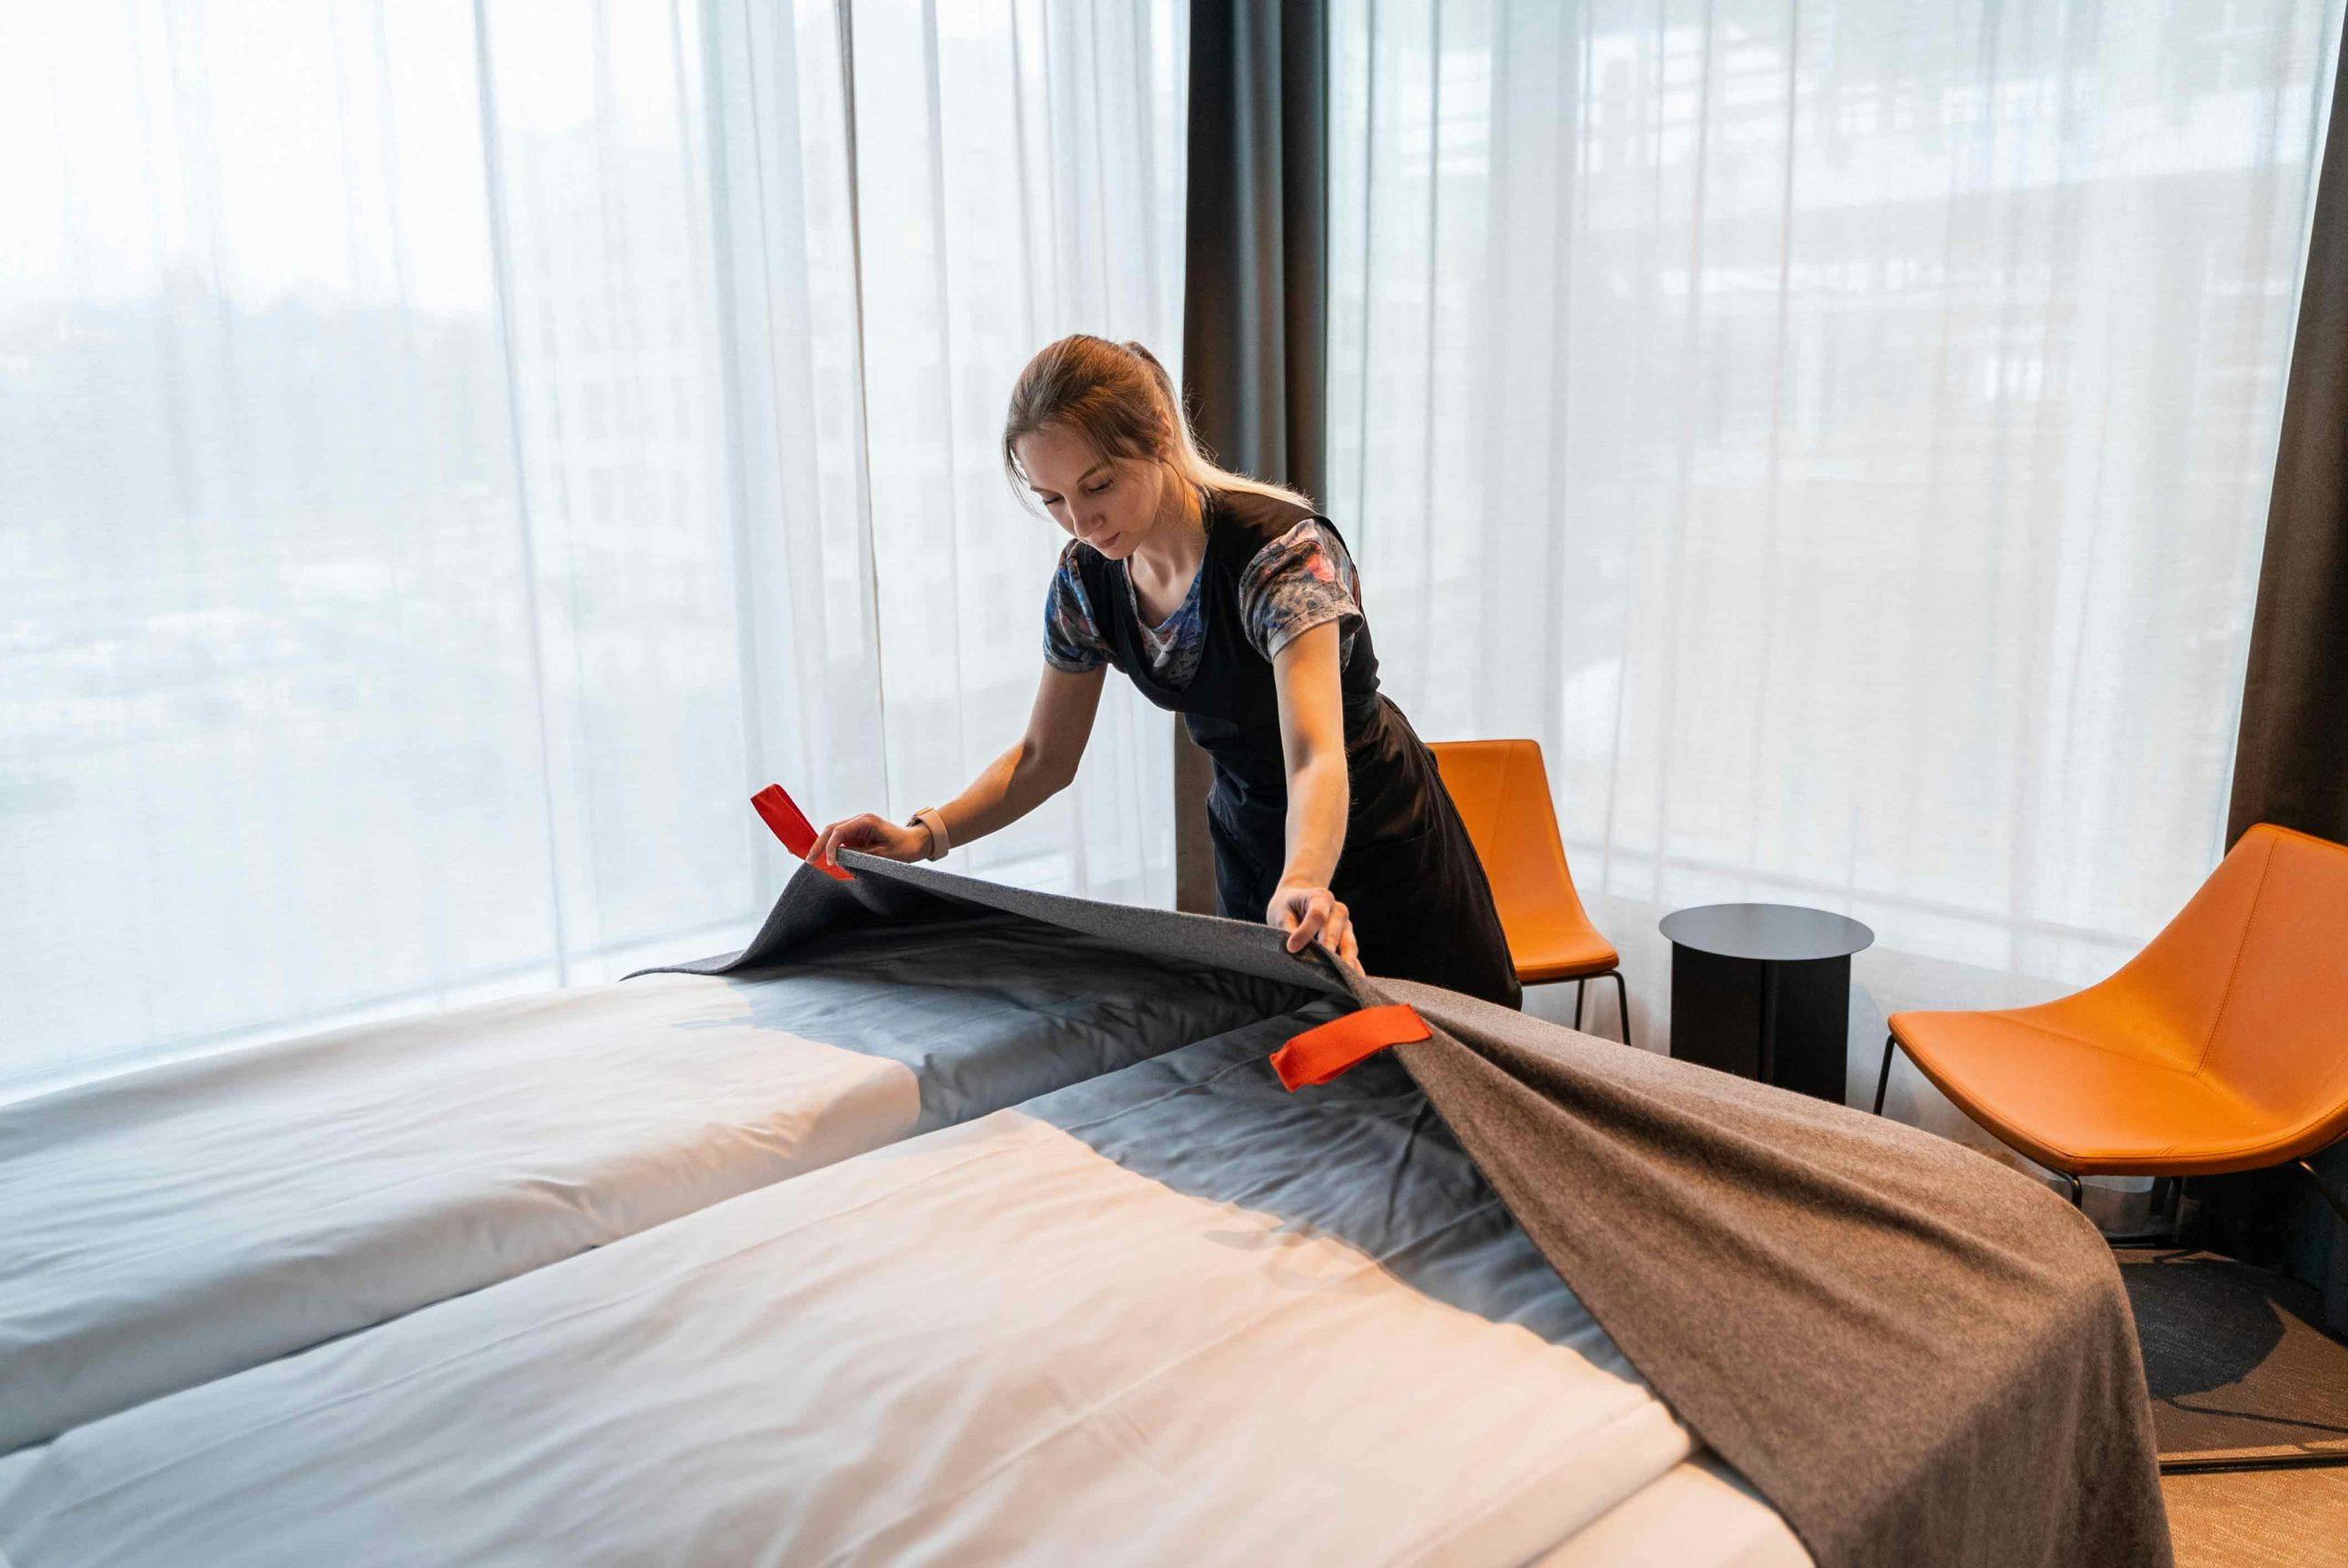 This picture shows housekeeping at Citybox